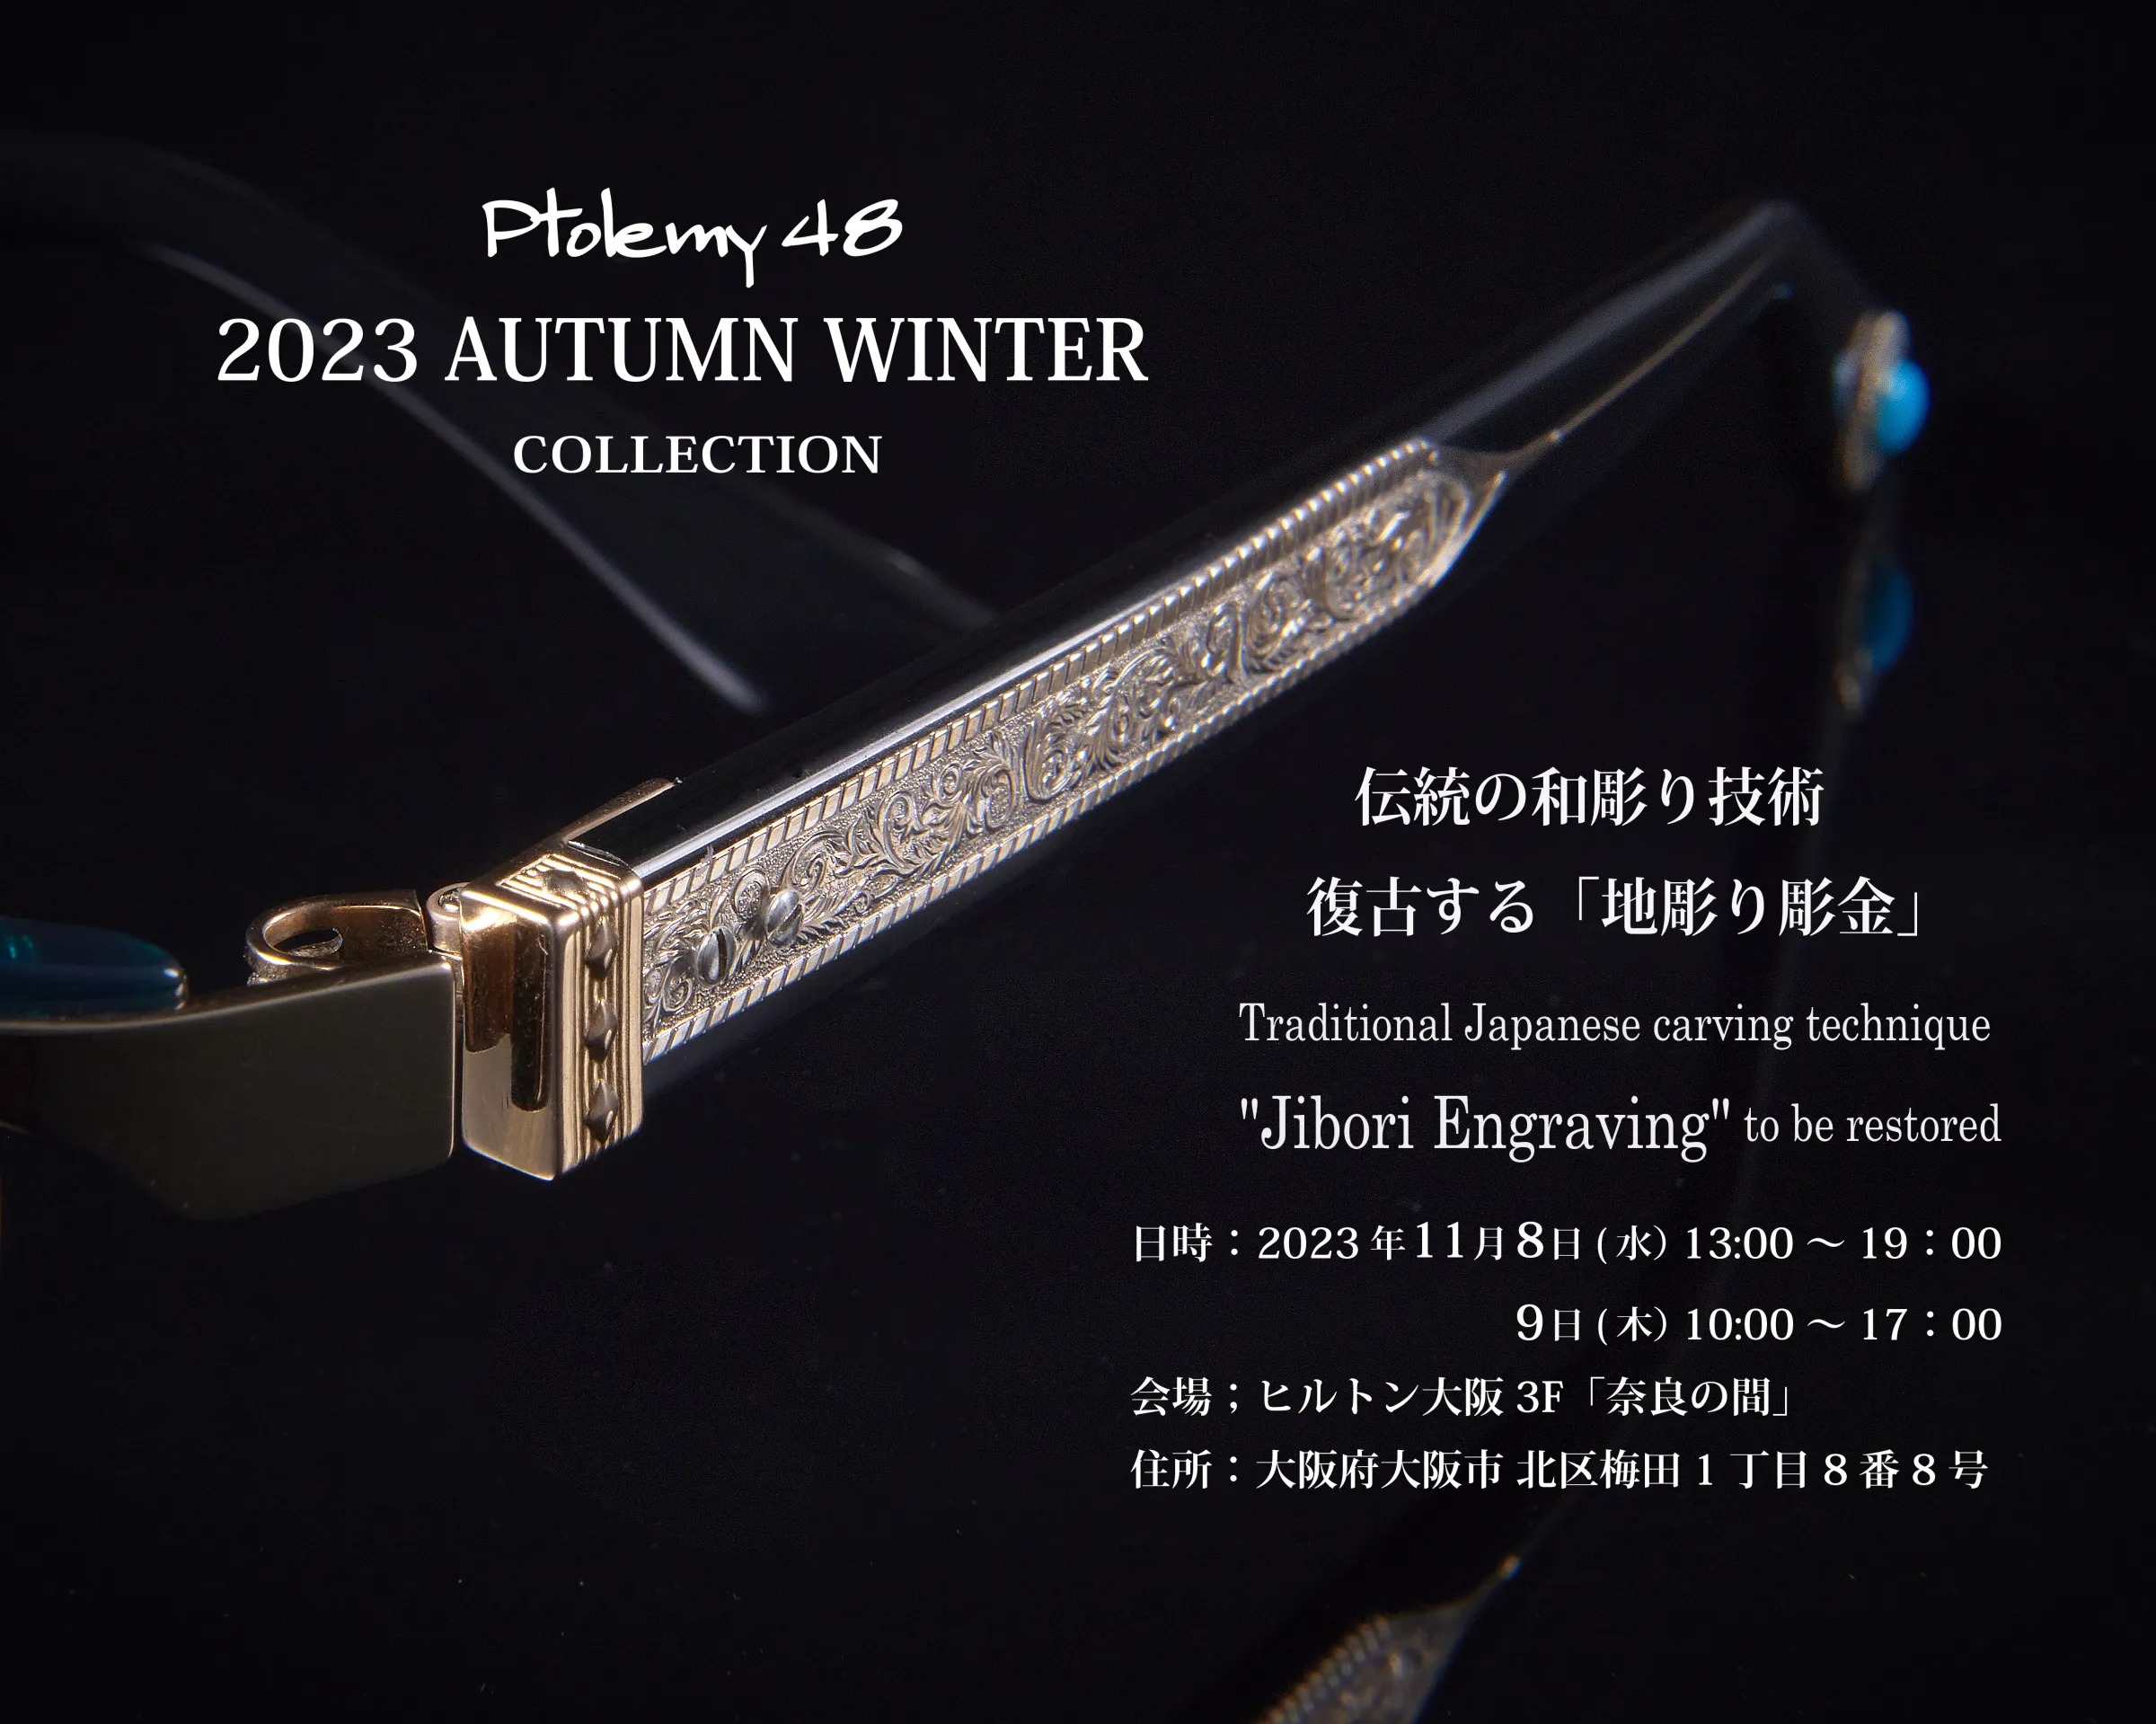 Ptolemy48 2023 NEW Collection「 ヒルトン大阪展示会」のご案内。